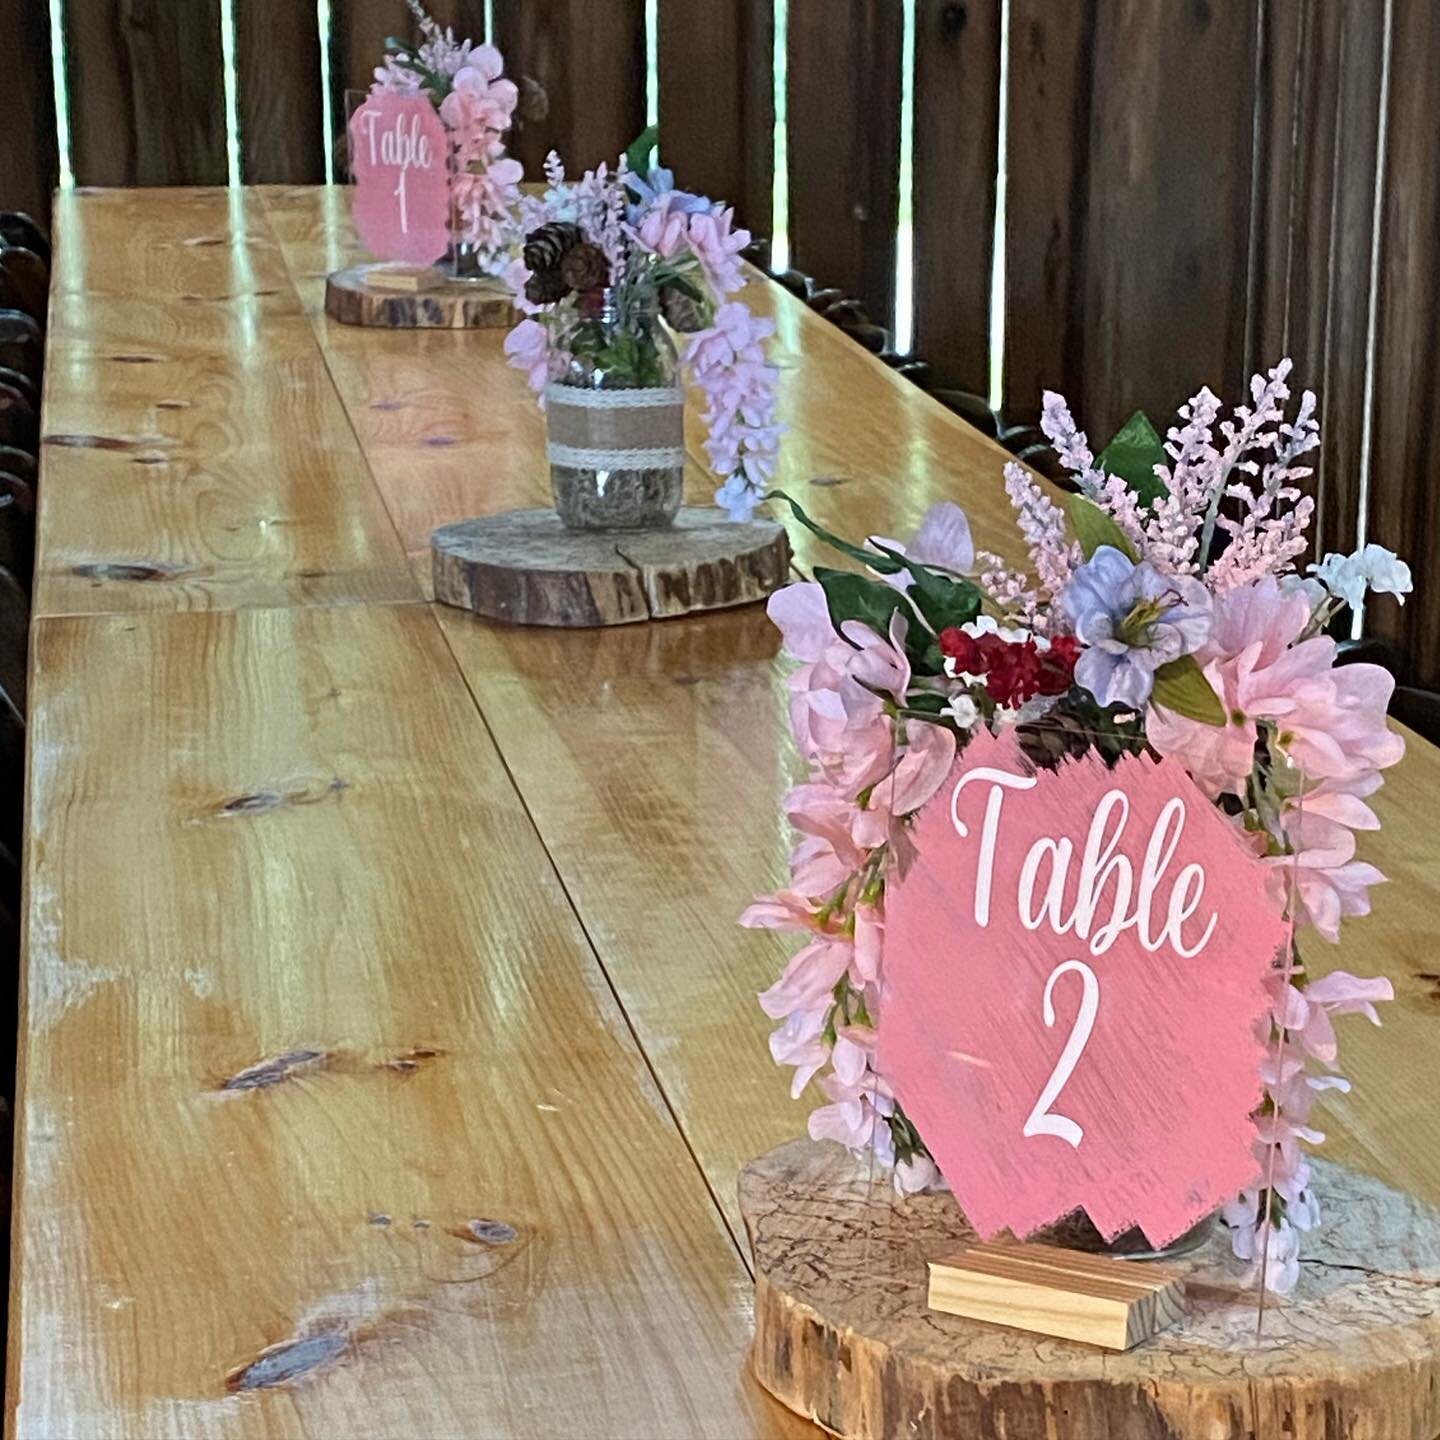 Simple, beautiful, and elegant decorations for centerpieces did not even compare of the beauty of the love shared for Laura and Brandon wedding! Congratulations! It was a pleasure hosting you and yours!